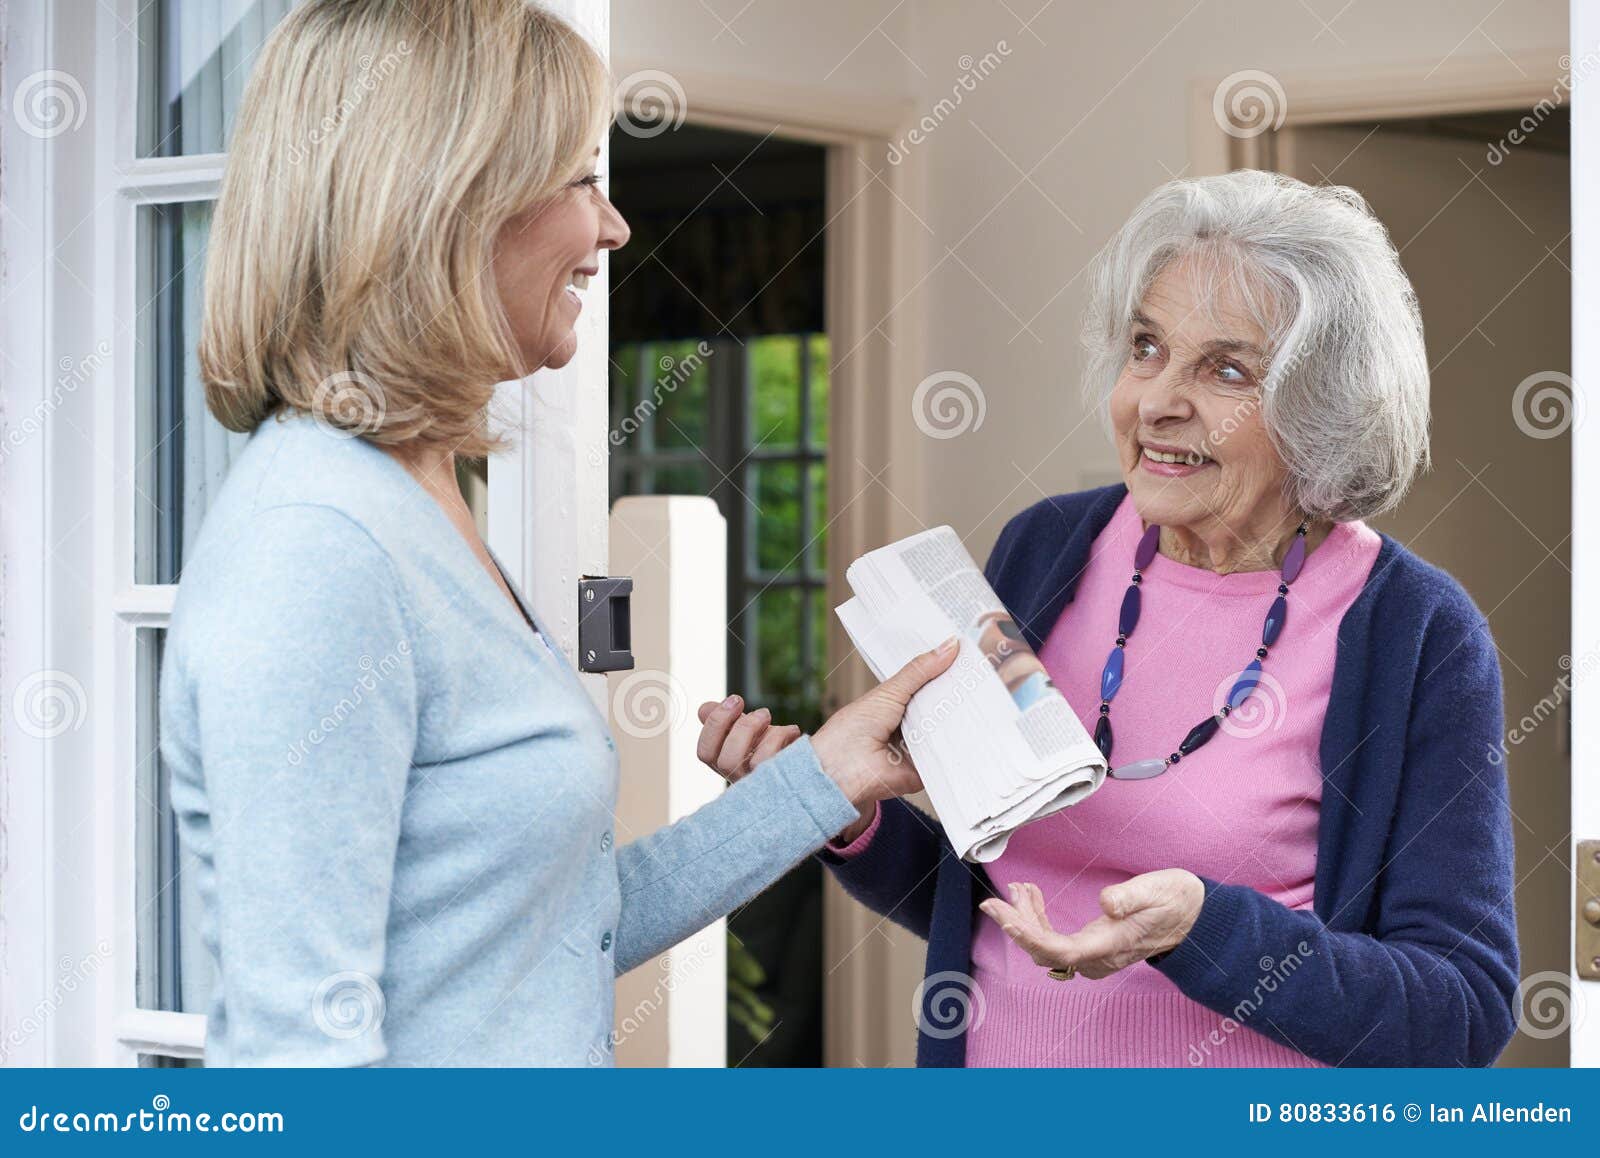 woman delivering newspaper to elderly neighbour